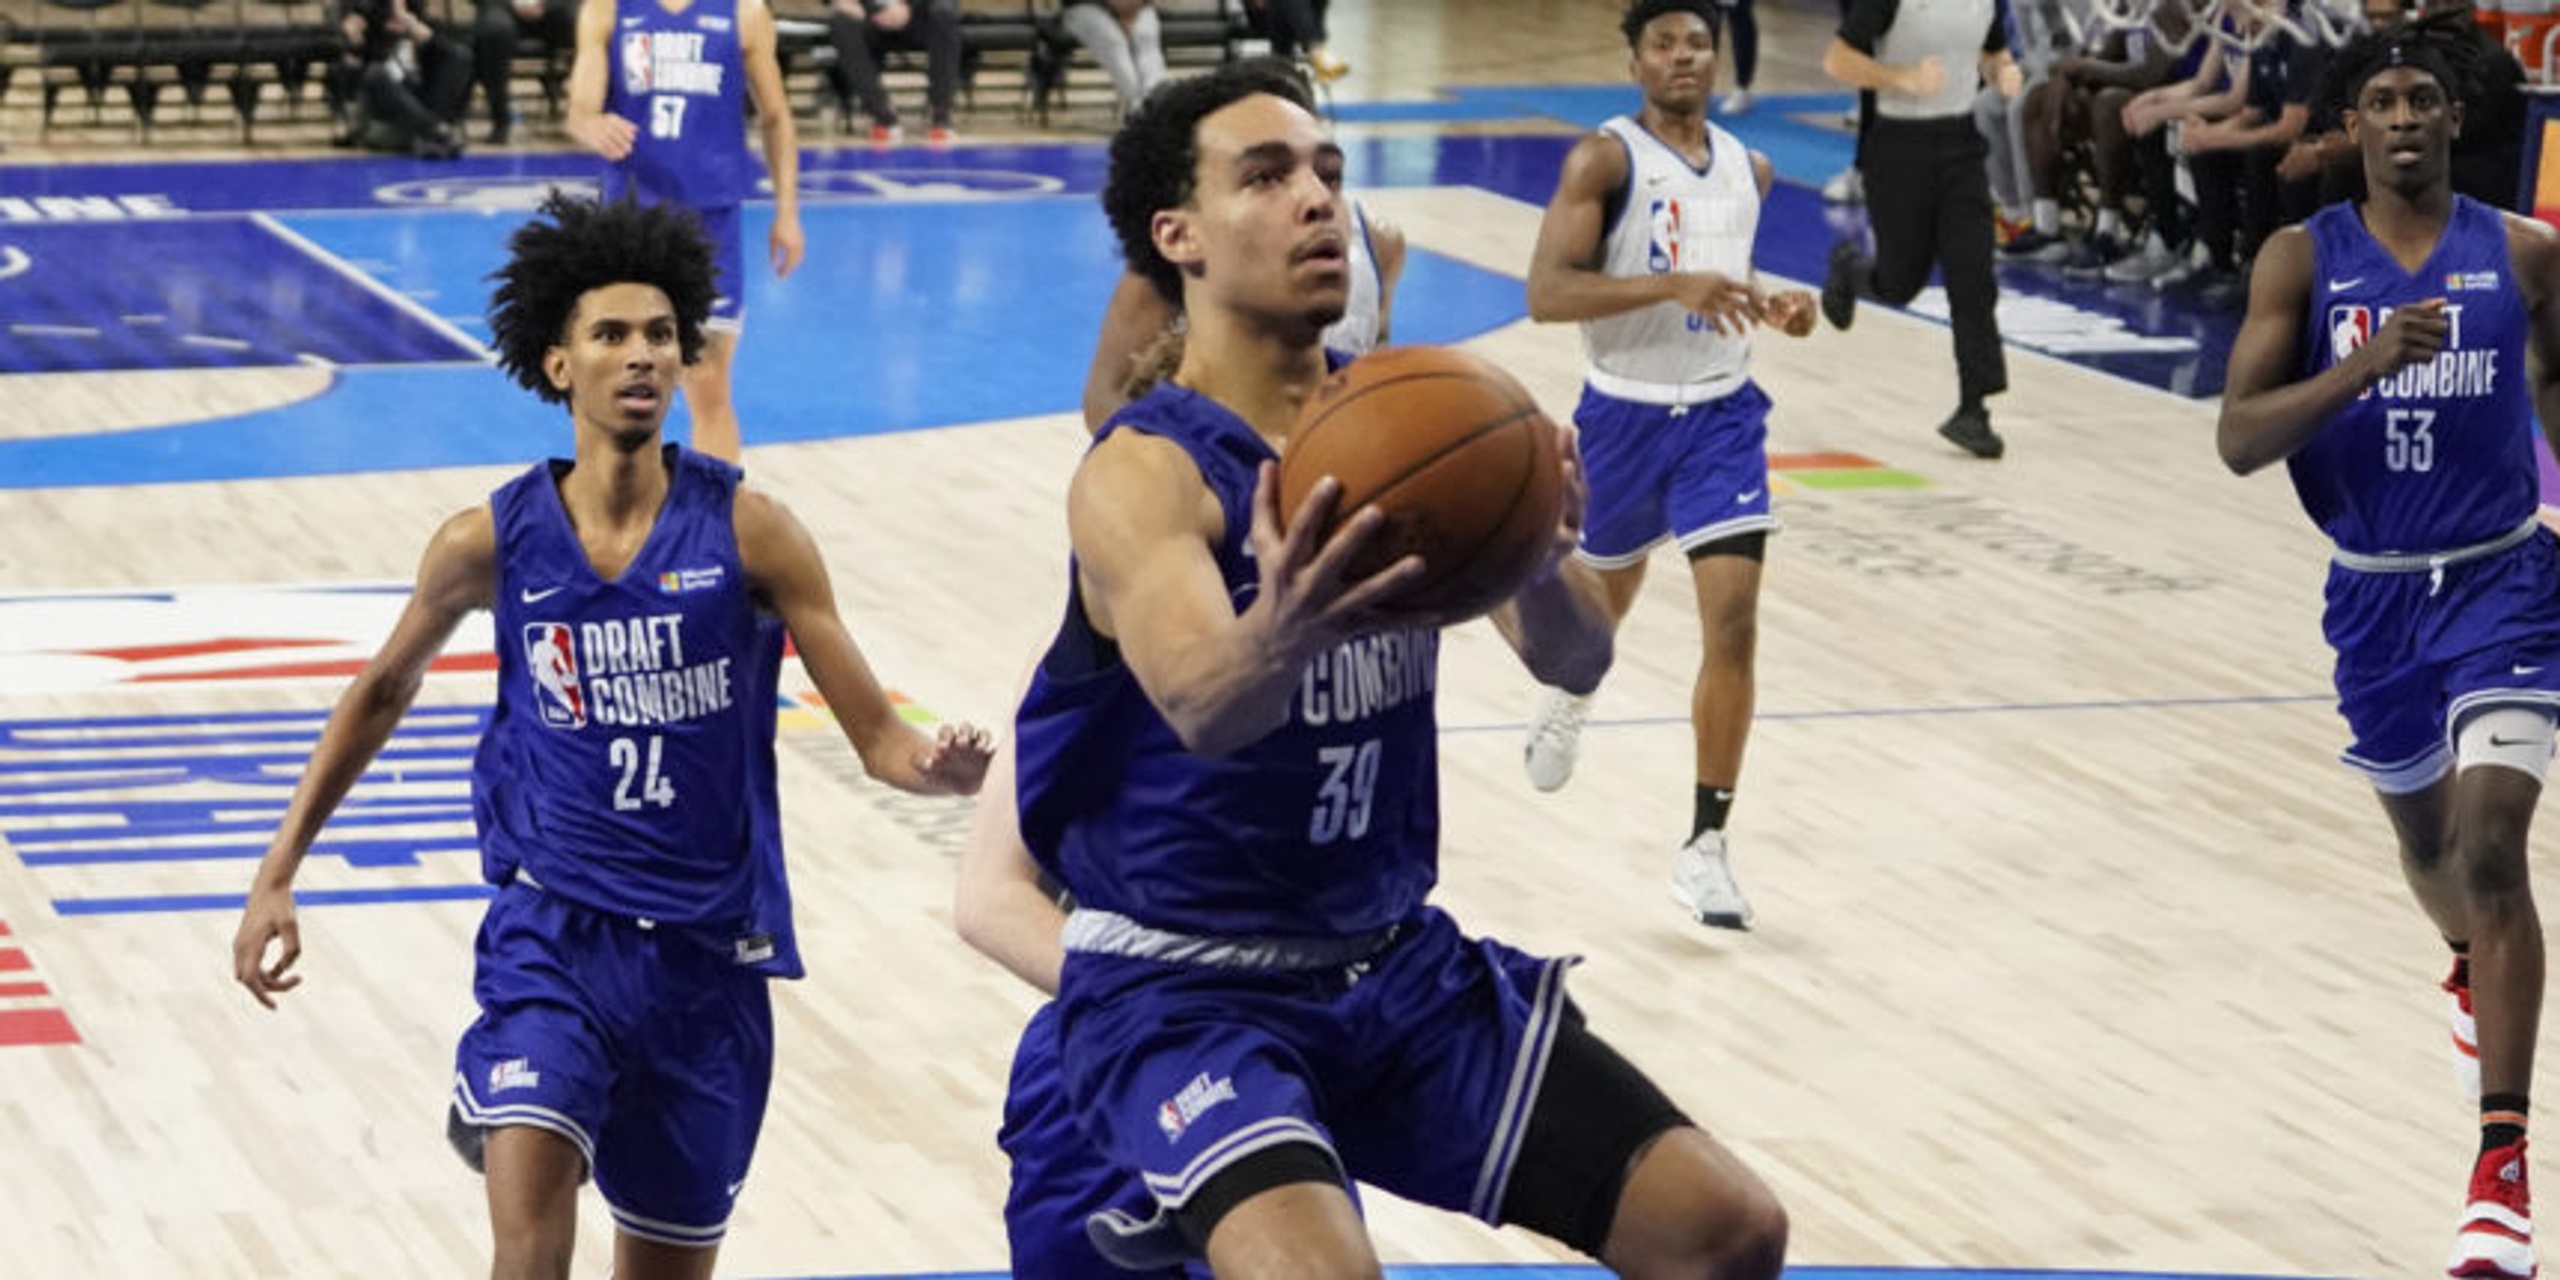 2022 NBA Draft Combine: Takeaways from Scrimmage No. 3